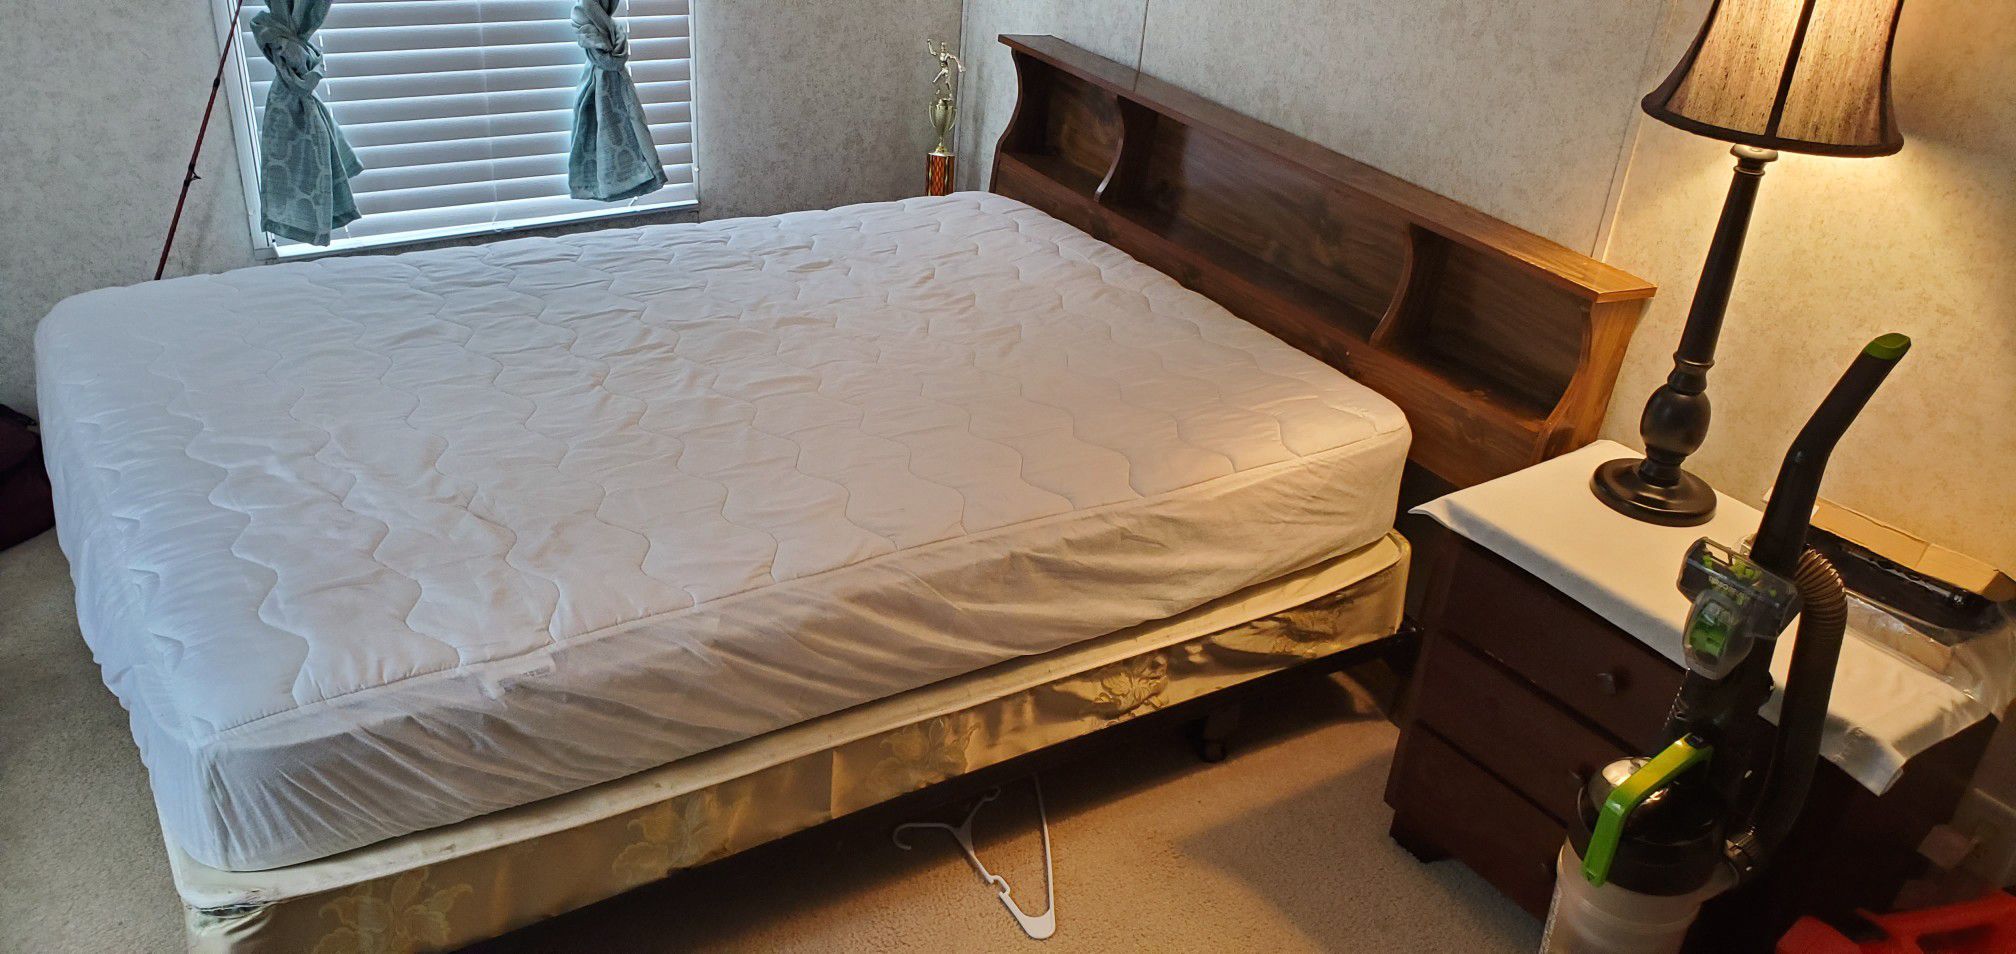 Twin size bed frame, with New pillow Top Mattress and box spring... Small Dresser included